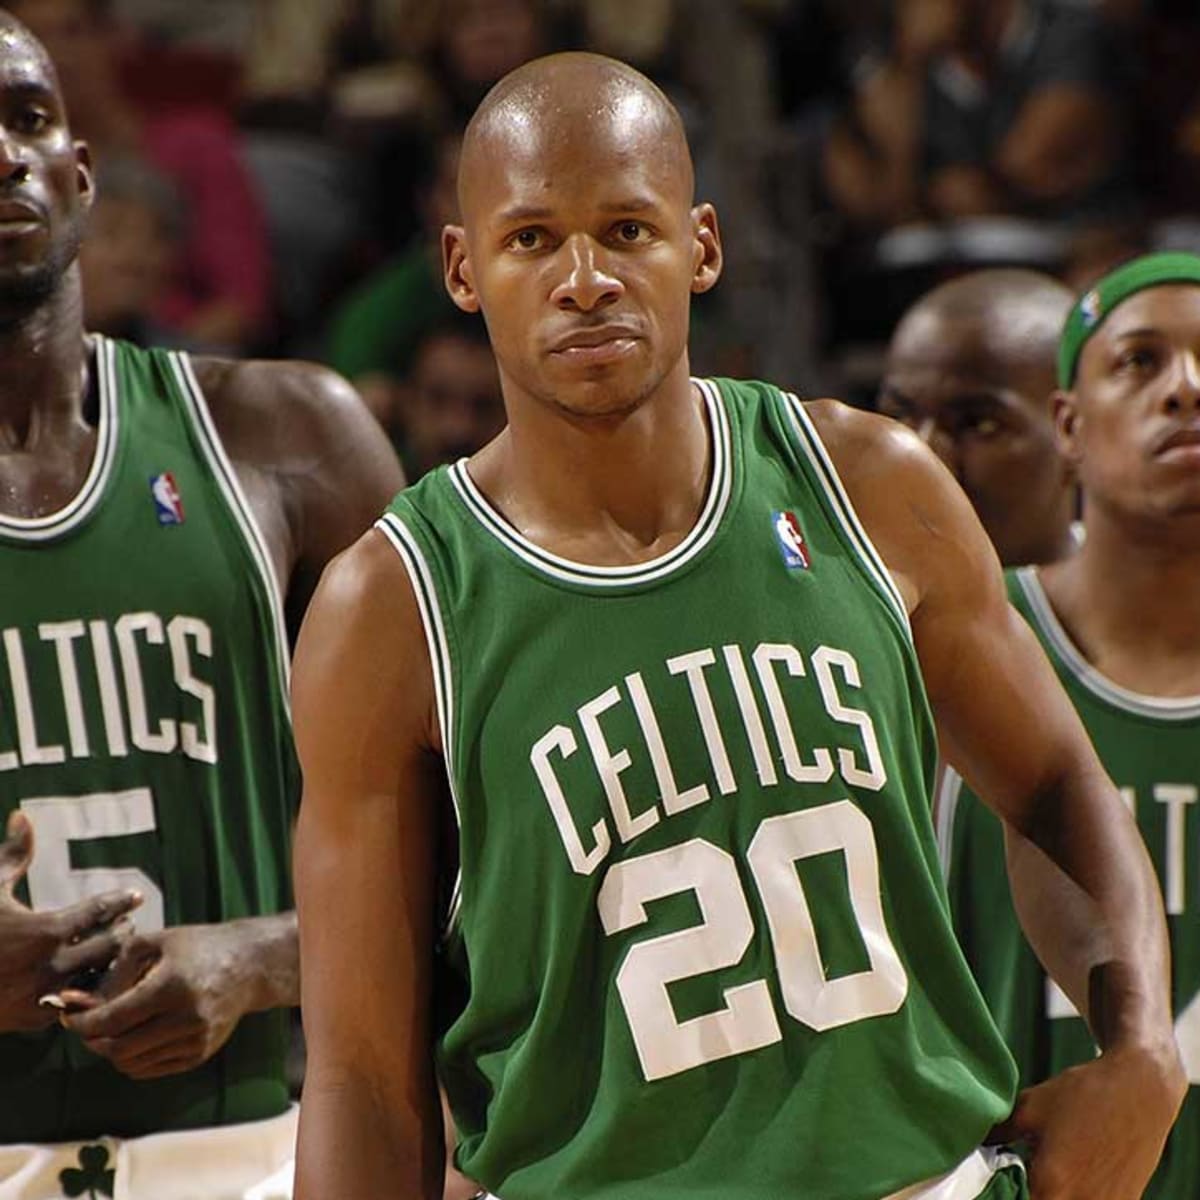 Kevin Garnett Squashes Beef With Ray Allen At Jersey Retirement